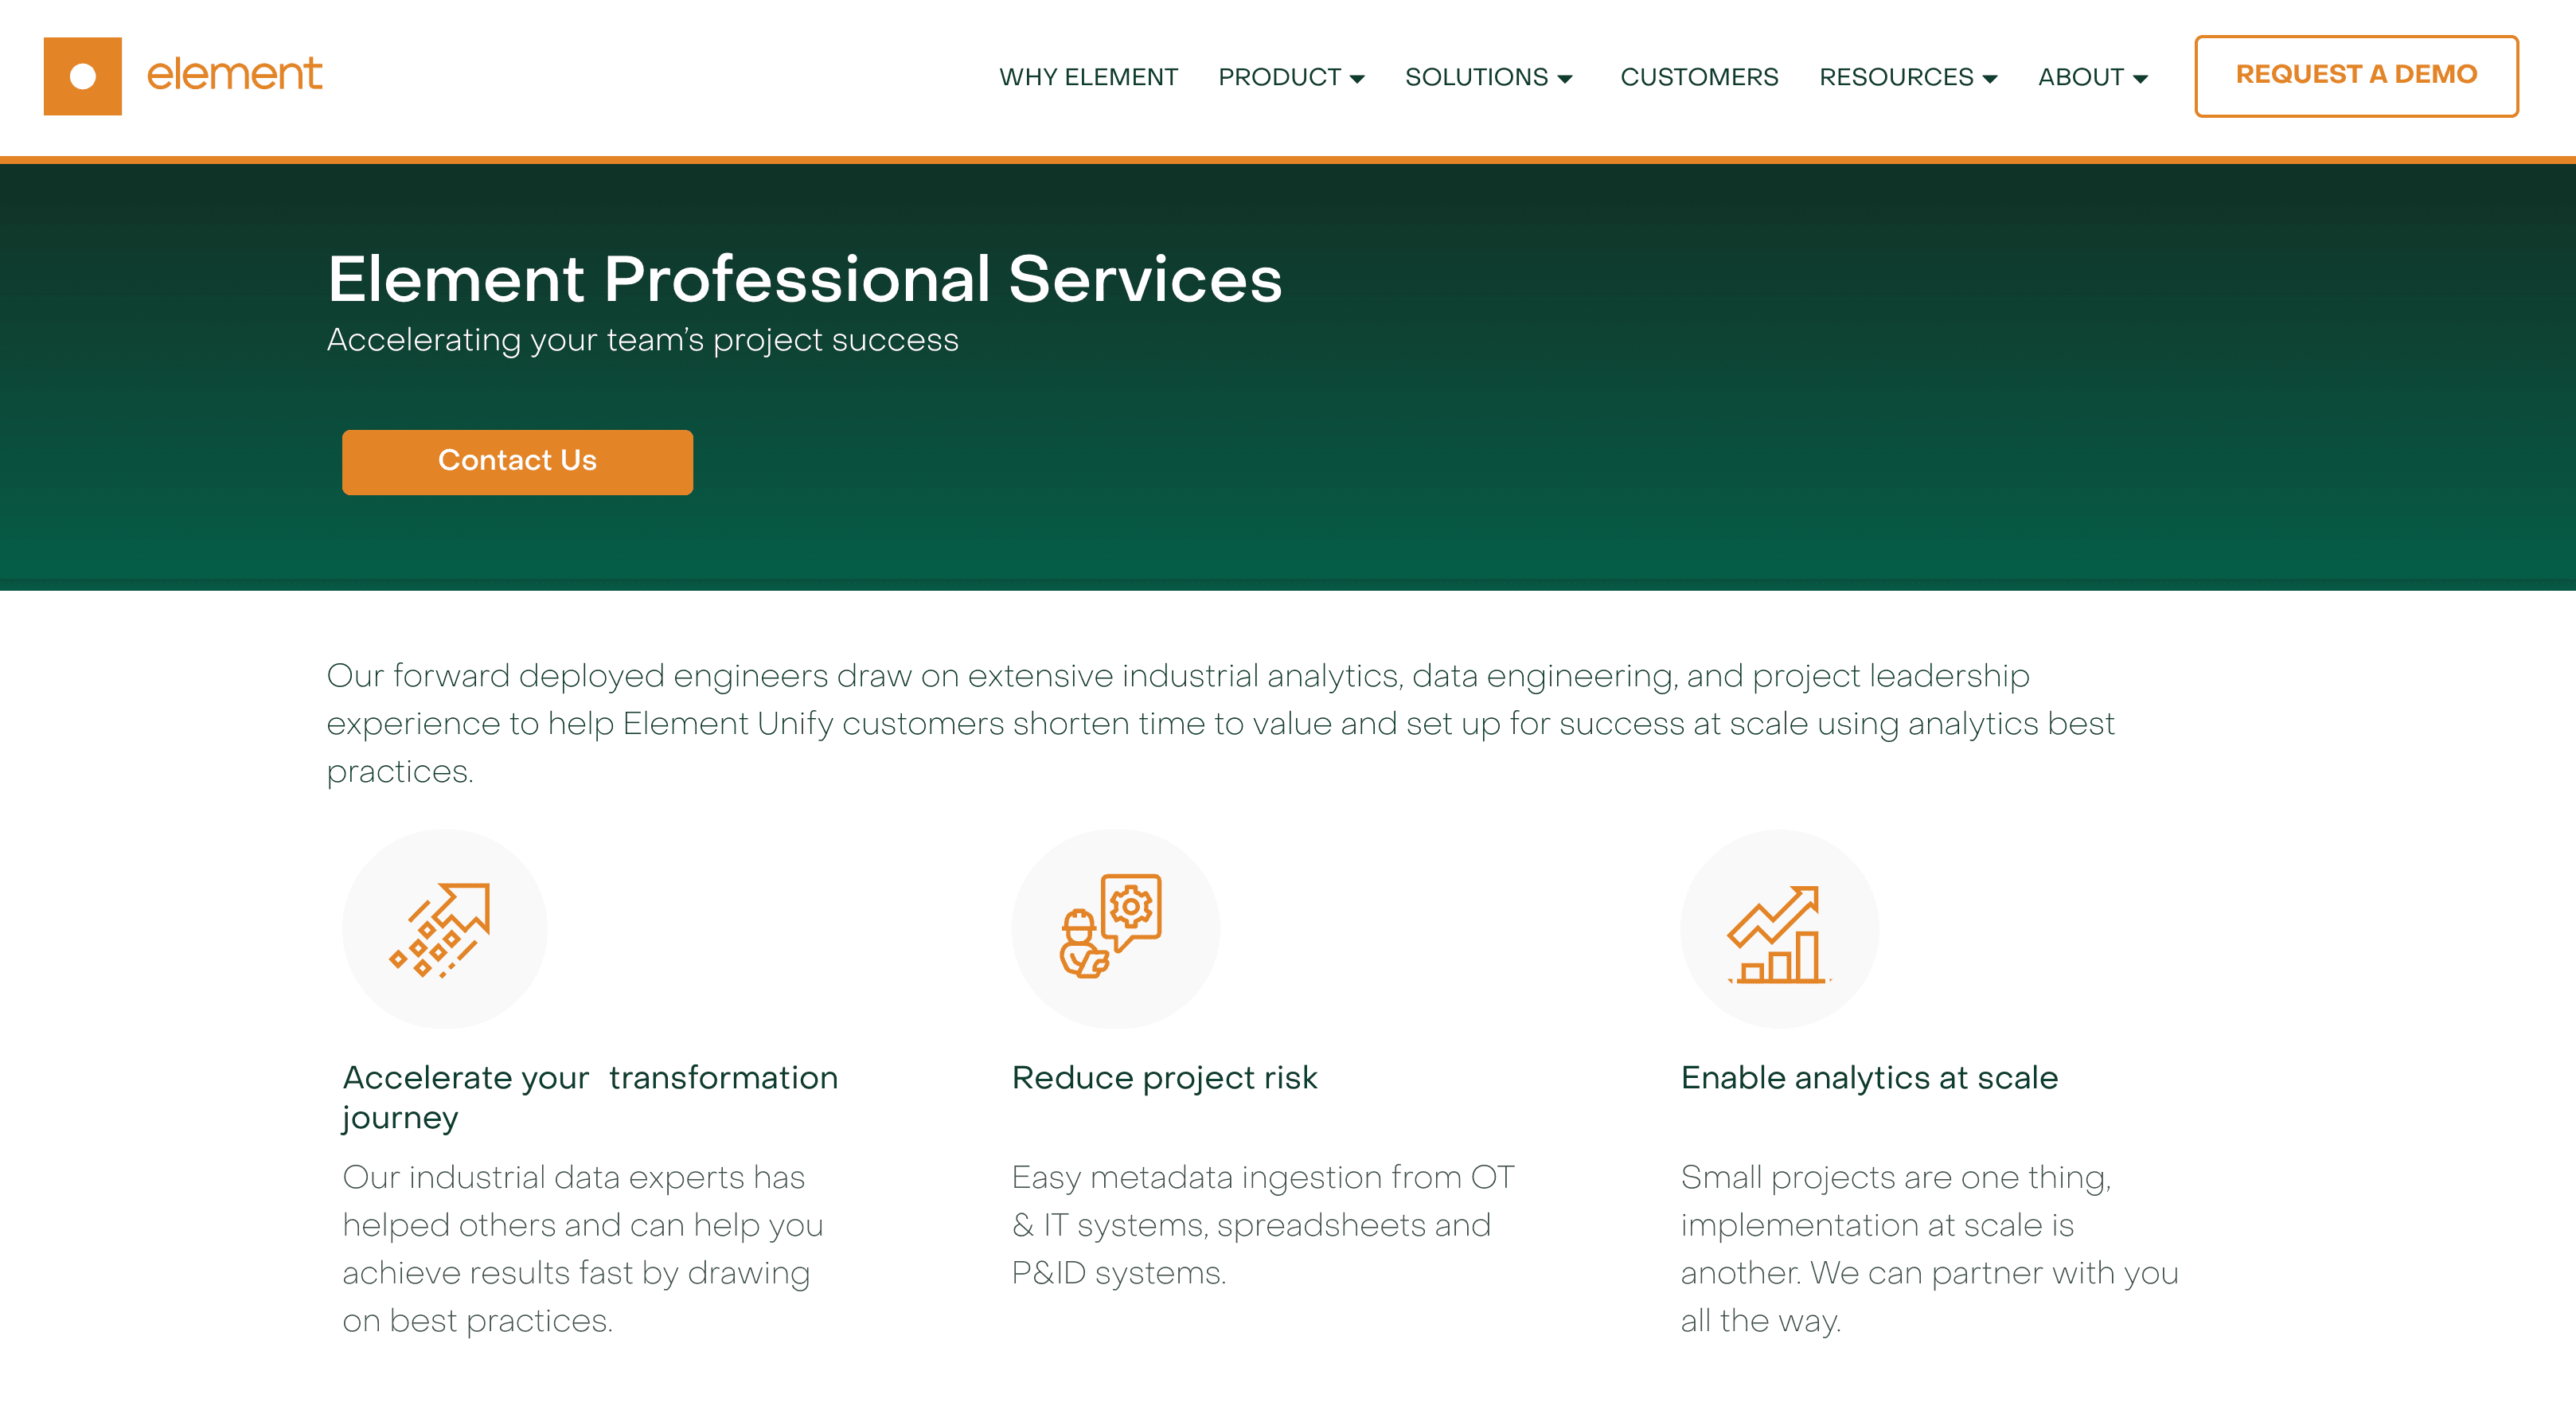 Product Element Professional Services image